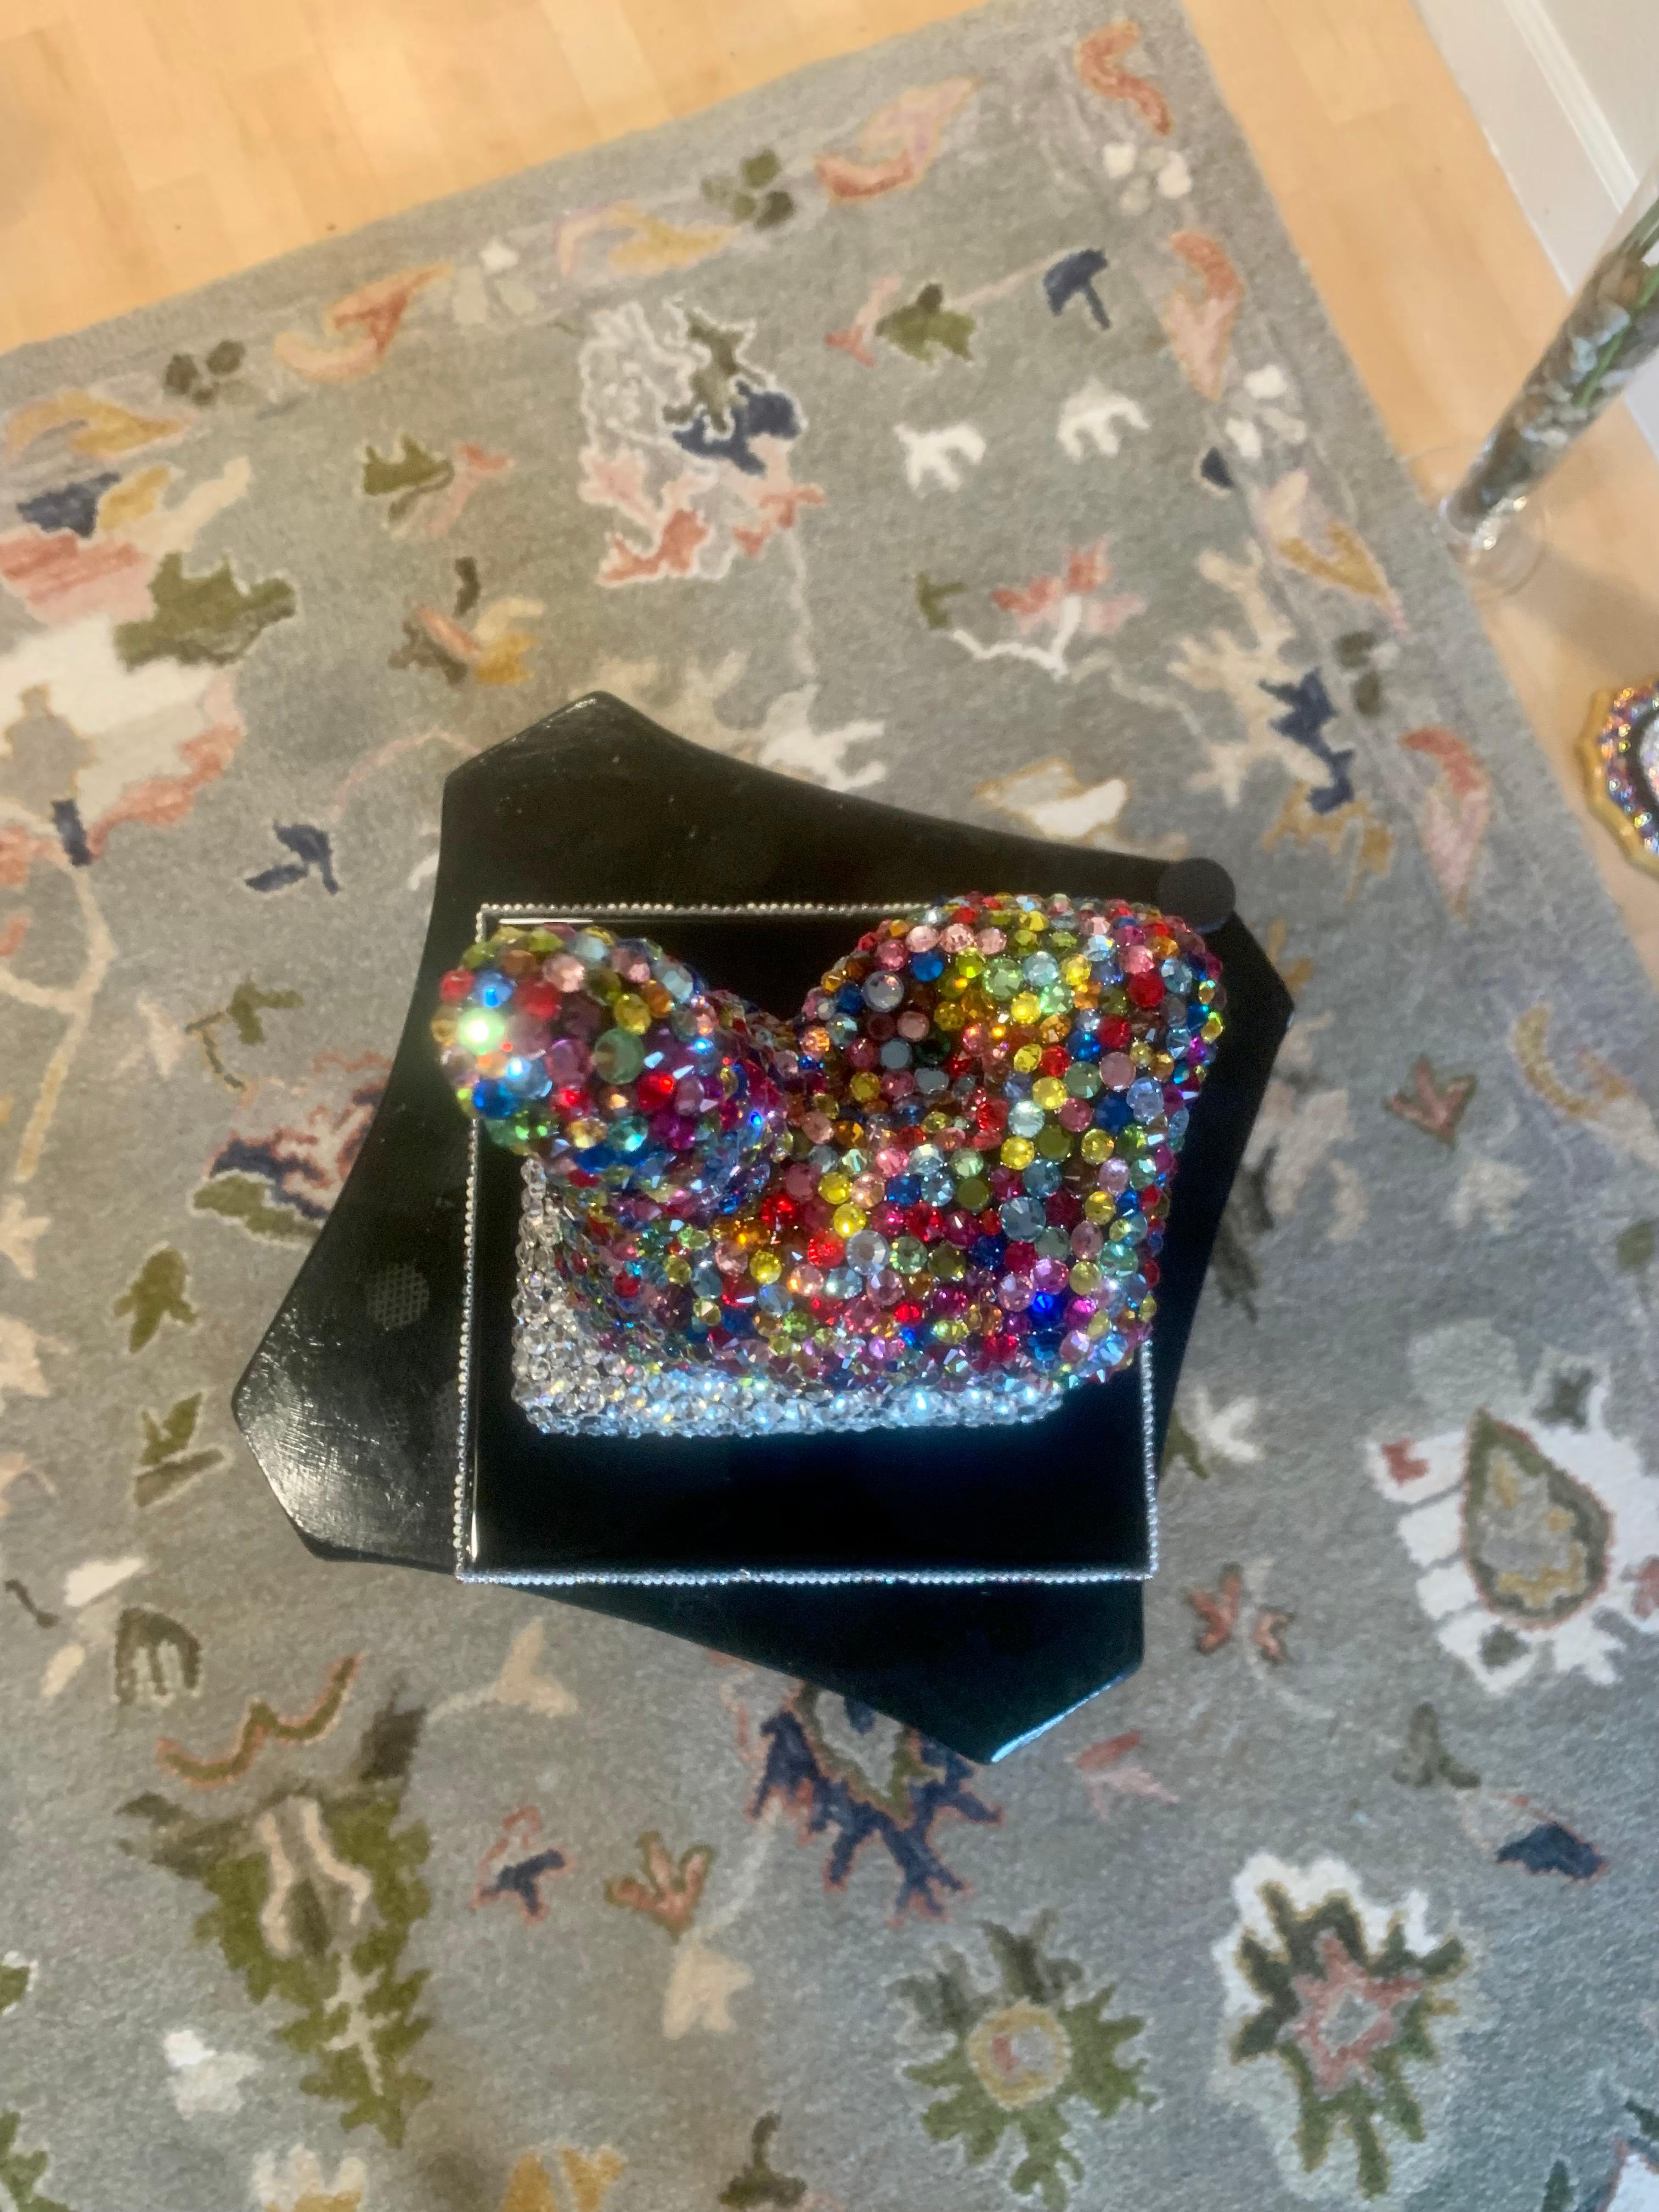 >>LIMITED TIME SALE<<

***Looking for one of kind precious high ending gift that no one else will have? This is one of them!***

ONE of a kind Porcelain Thumbs Up sculpture encrusted with genuine Swarovski crystals and a permanent custom made wood